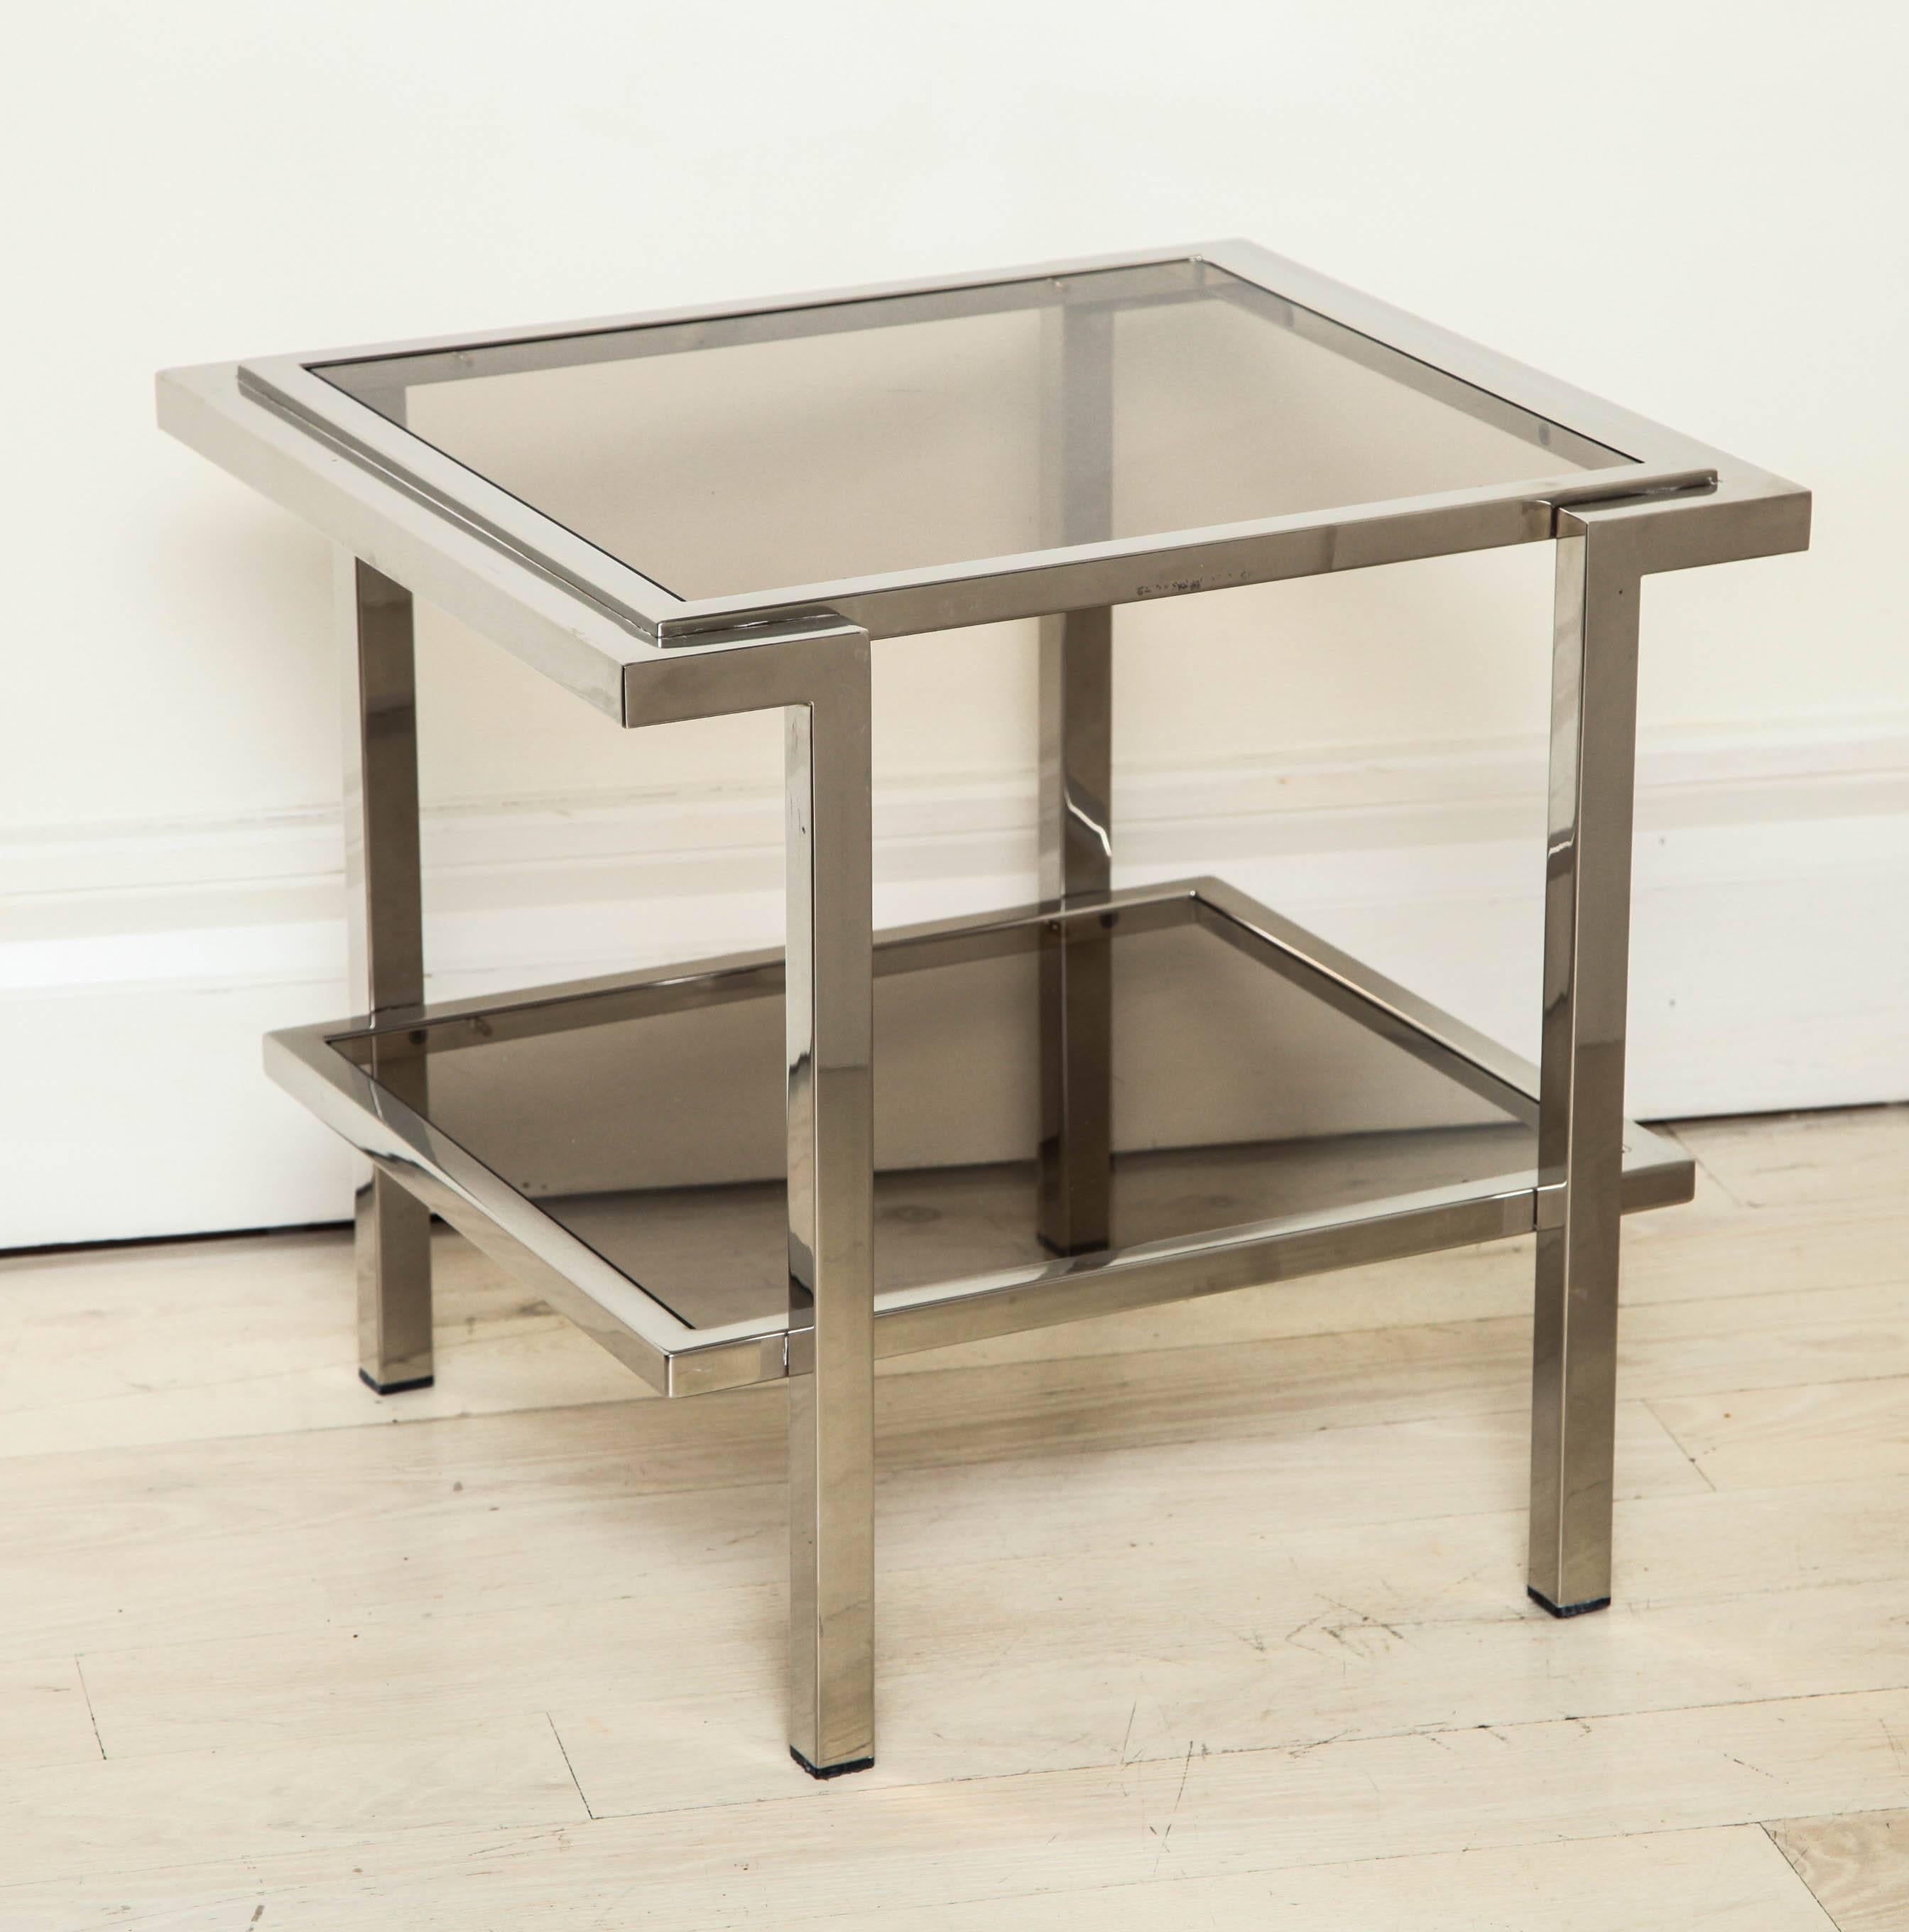 Pair of modern chrome and light gray glass two-tiered coffee tables.